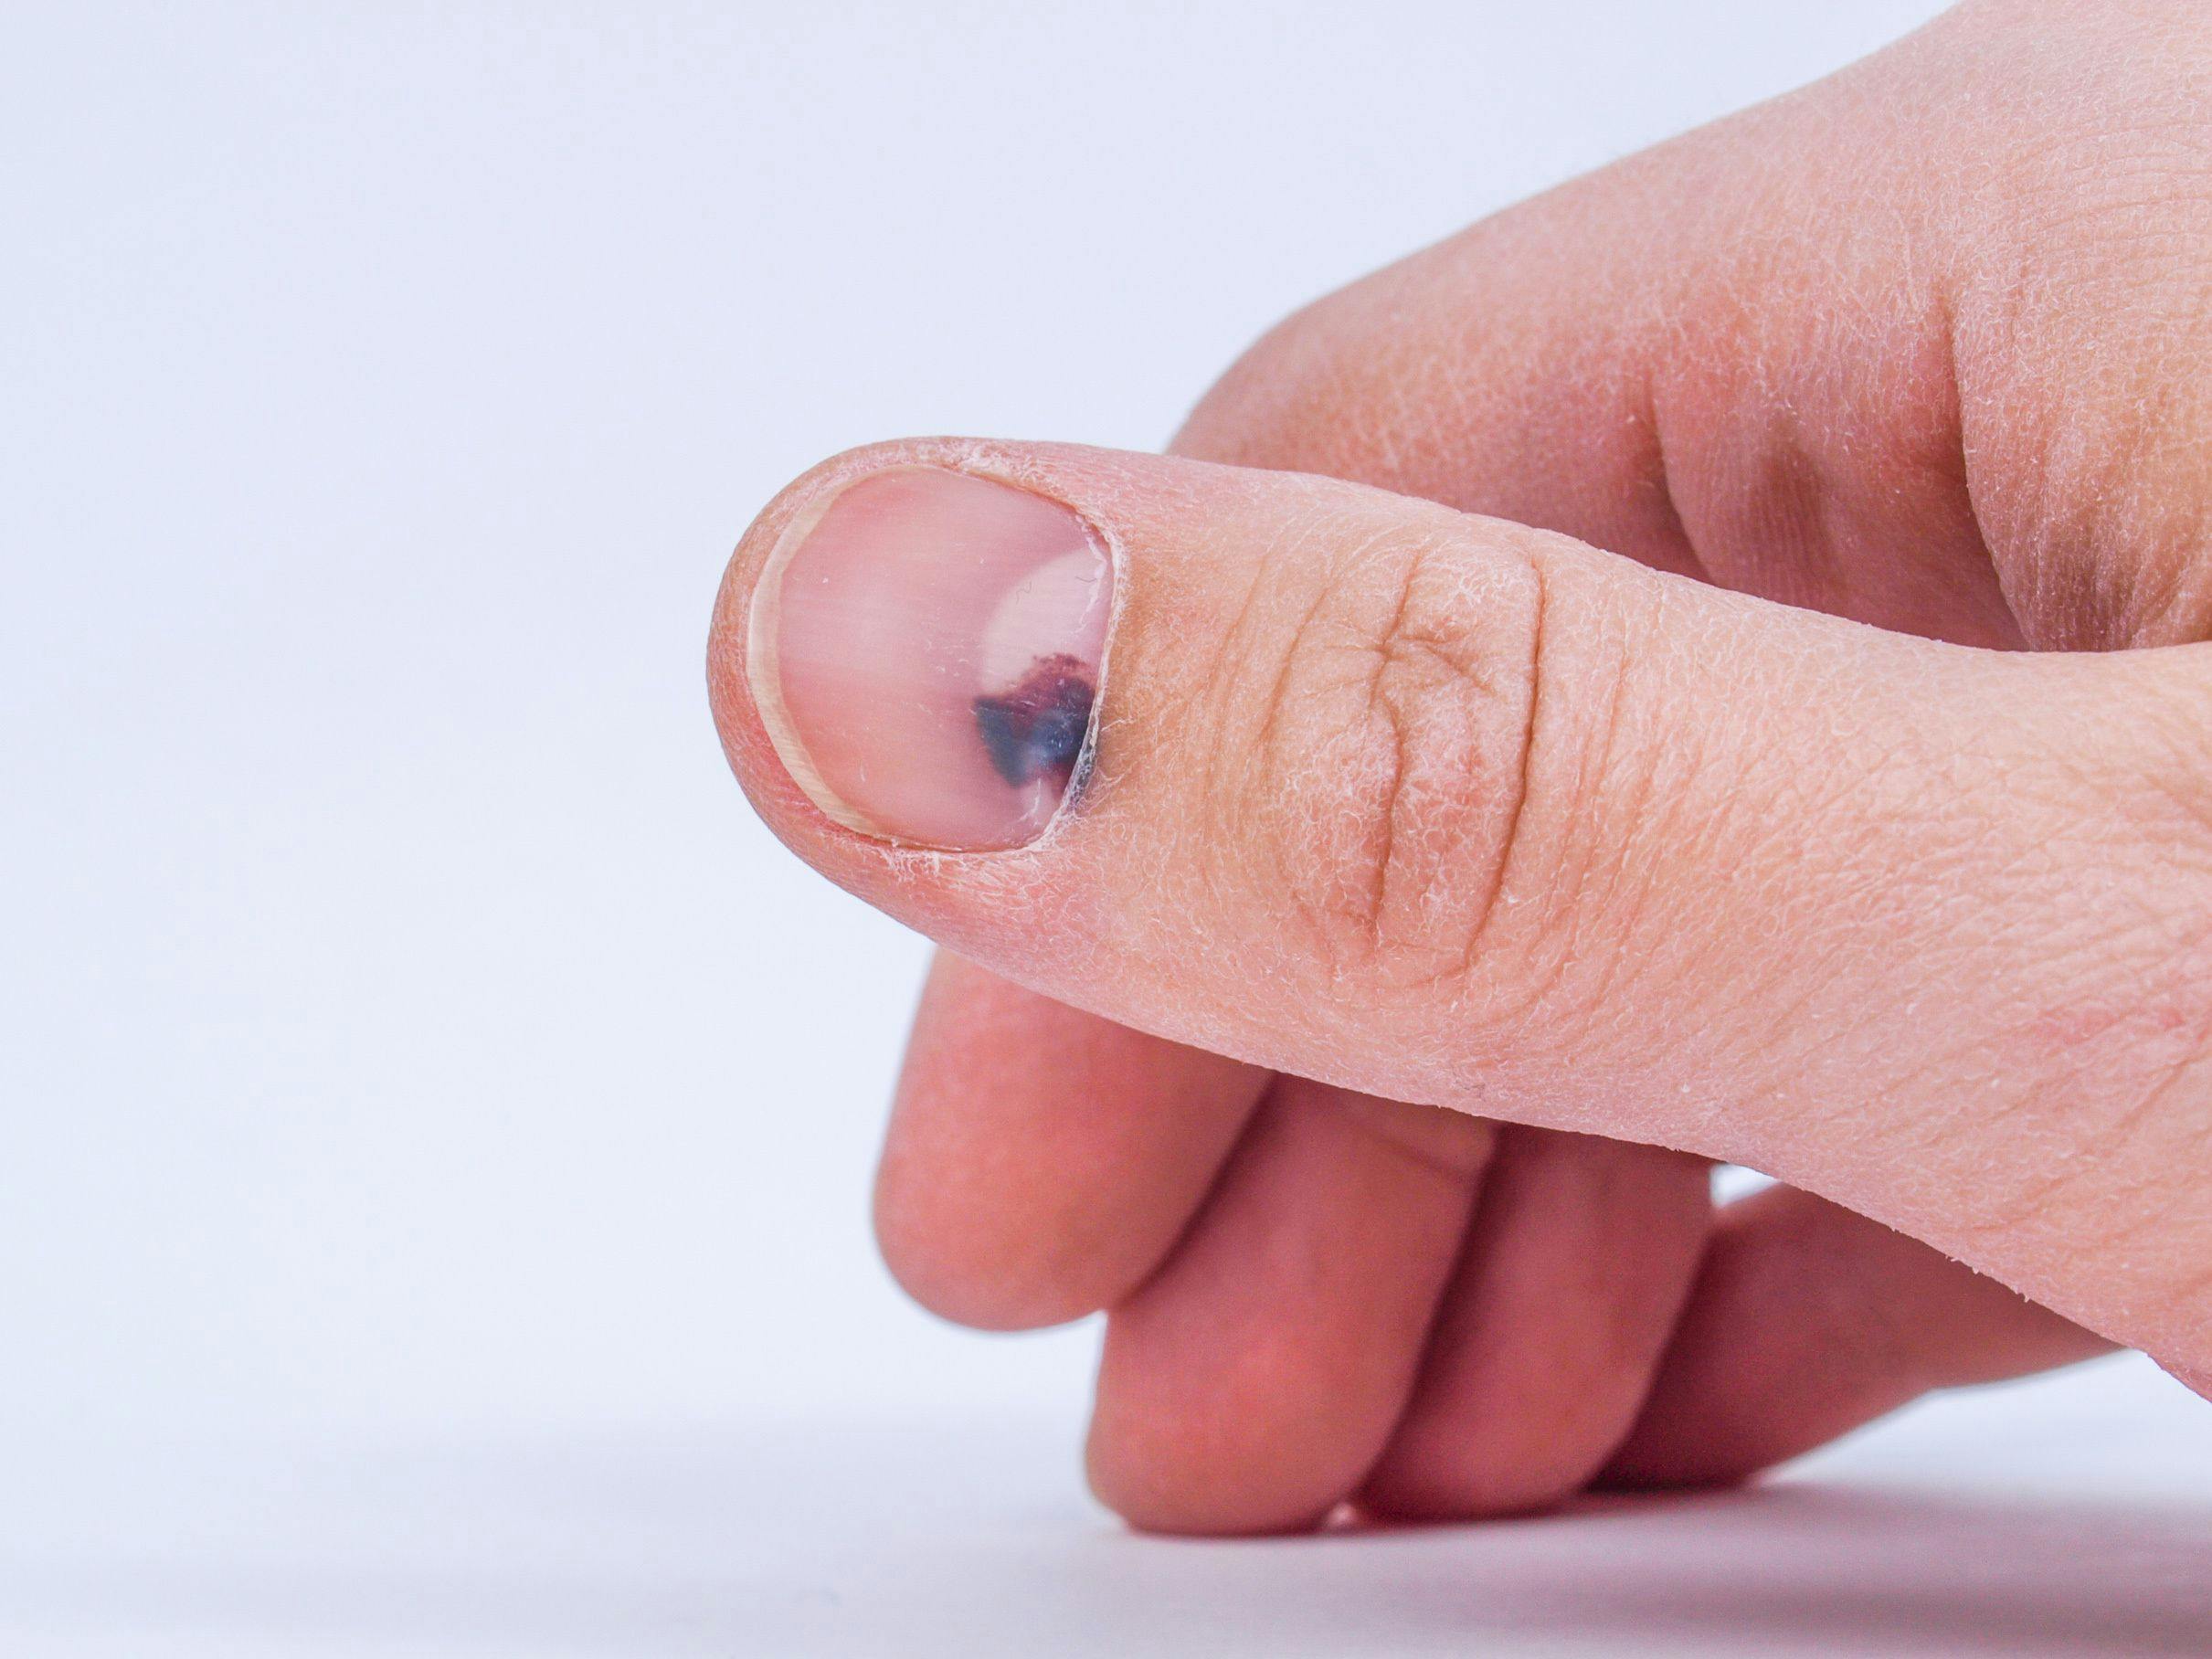 AAD Provides Nail Injury Treatment, Care Guidance